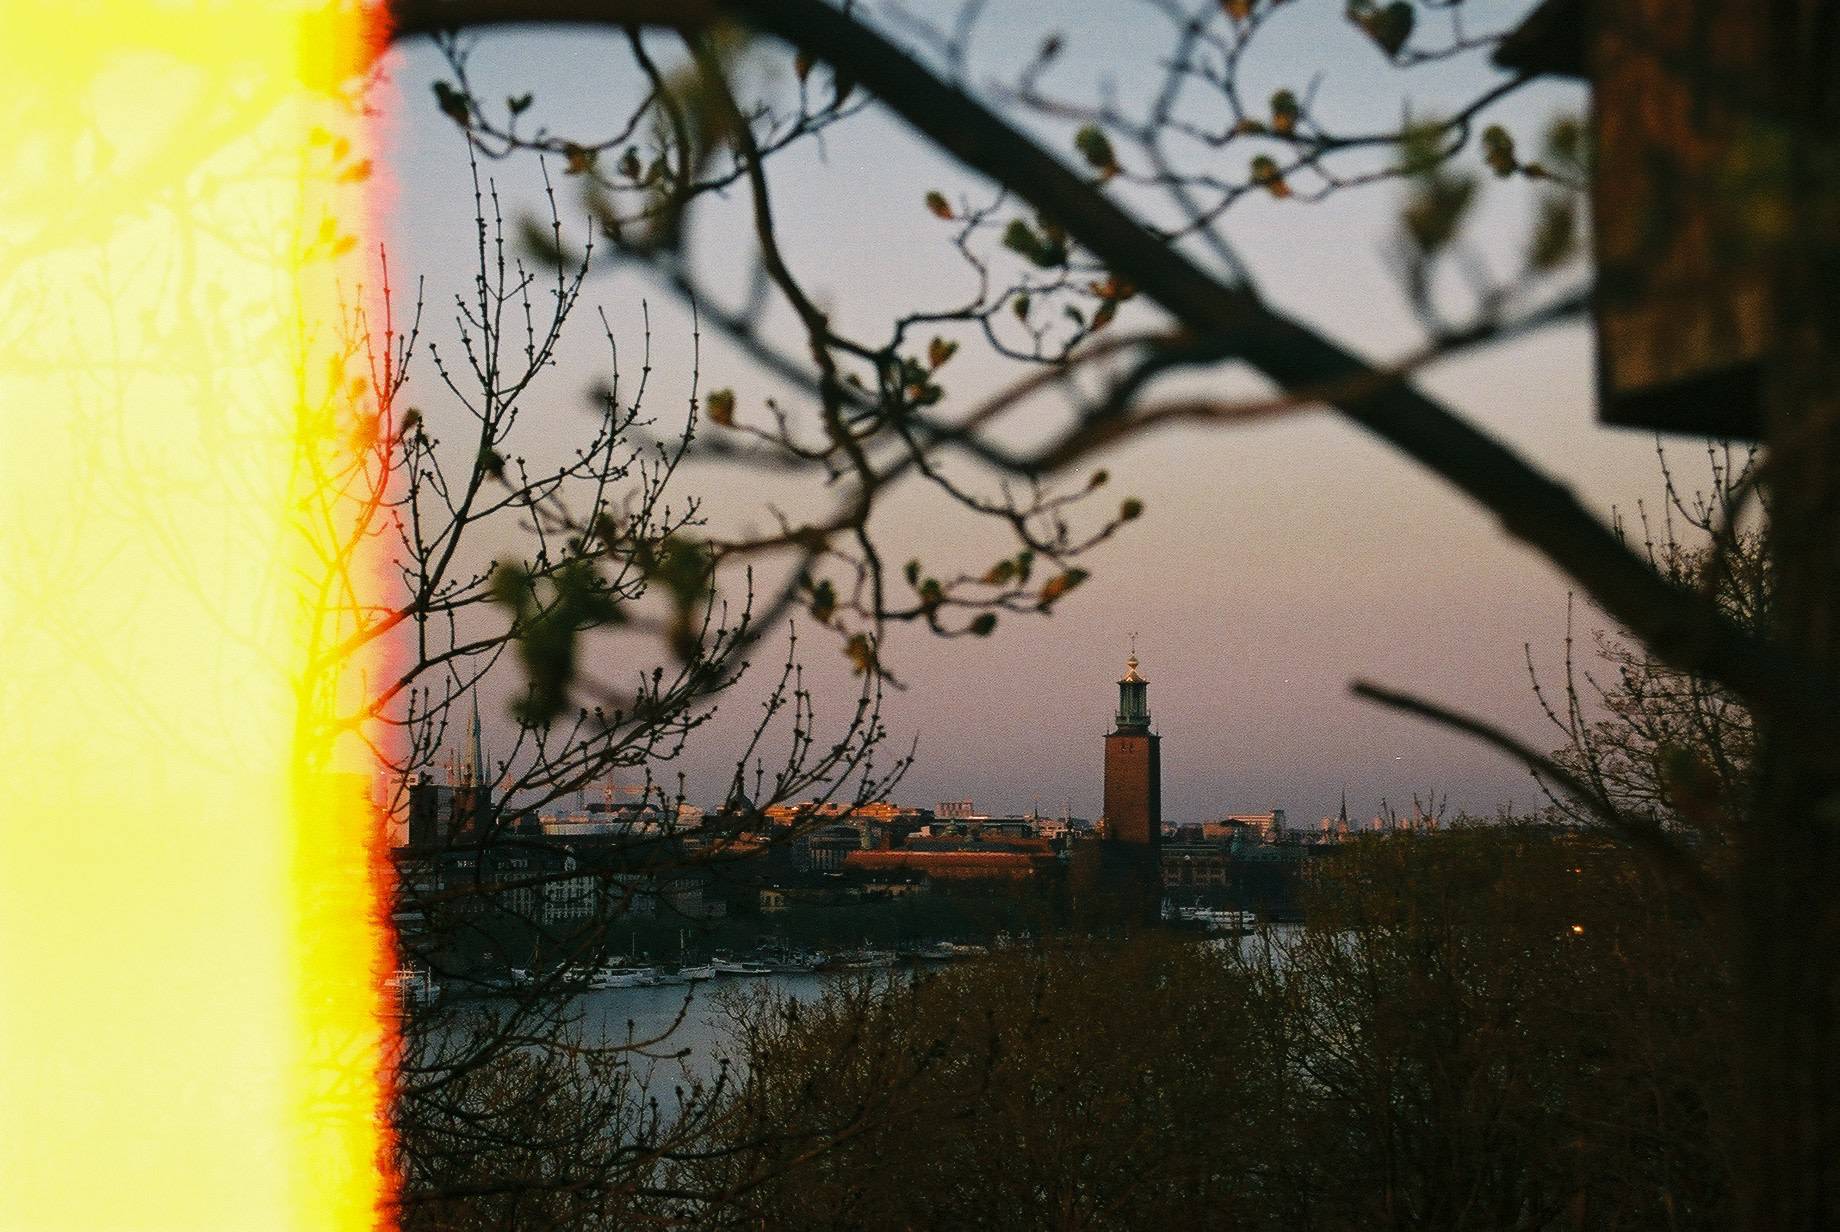 city hall of Stockholm seen over the river through branches, there is a yellow red band on the left side where the film is burnt